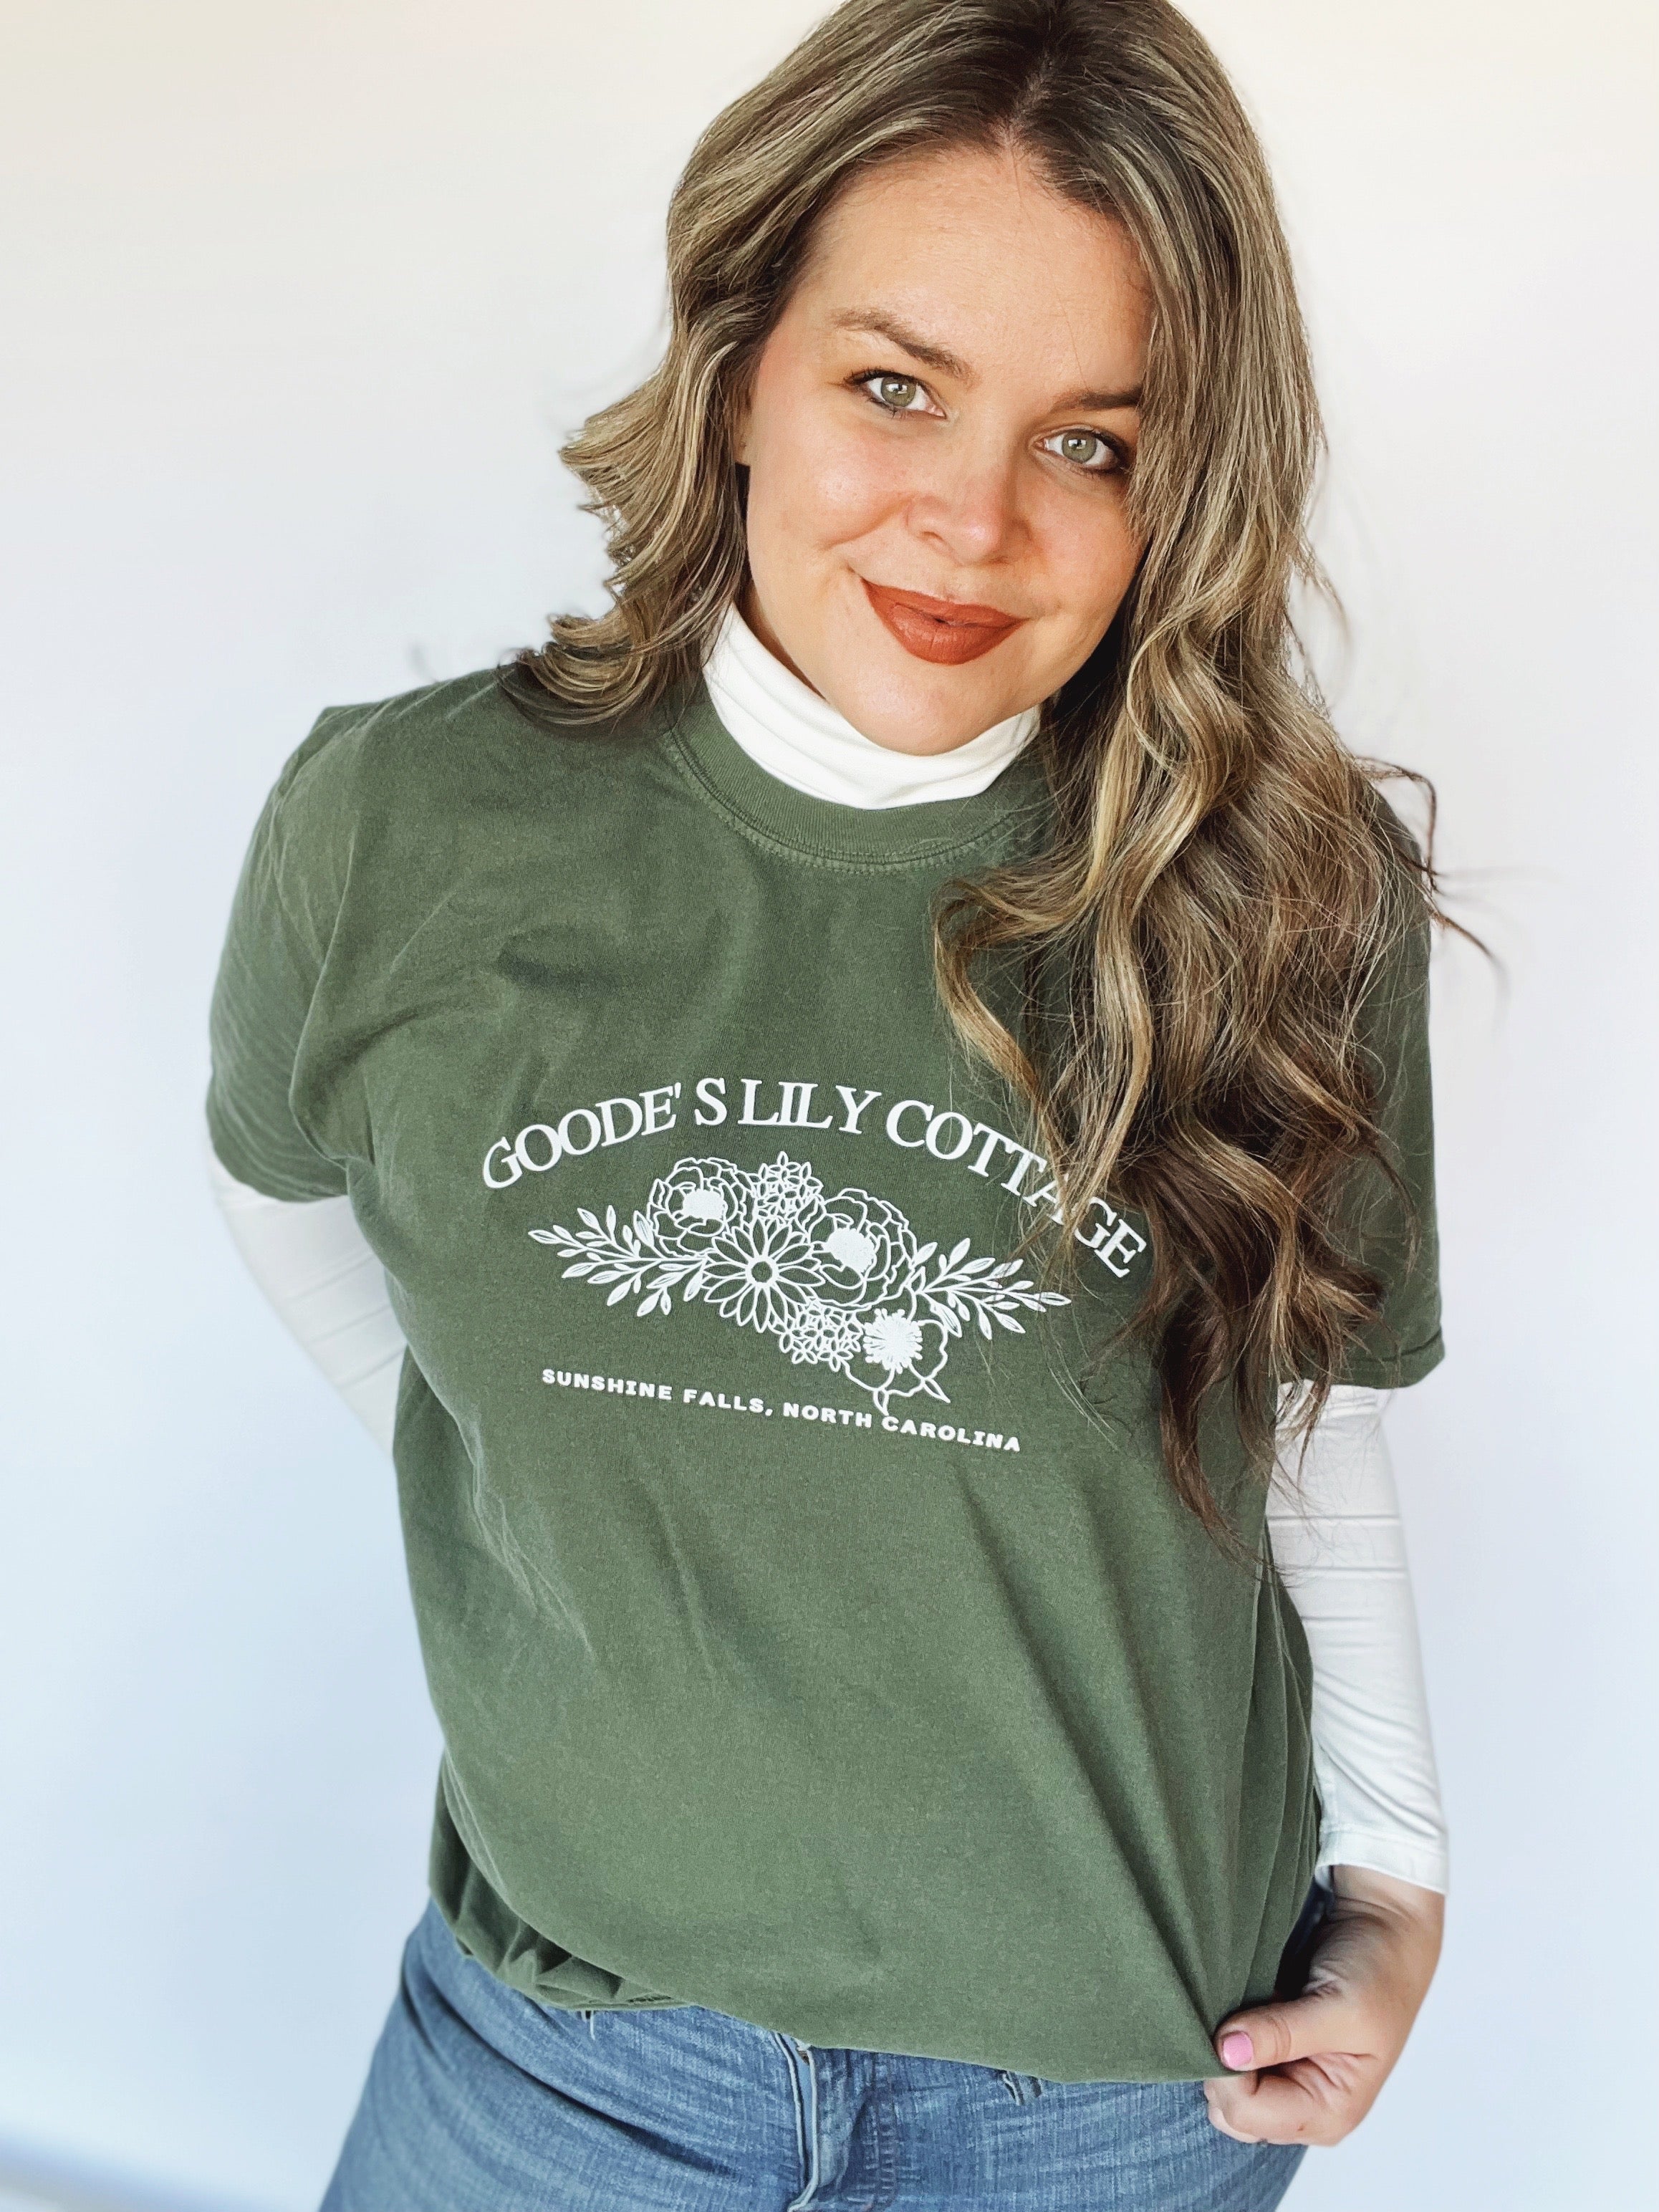 Goode's Lily Cottage Tee